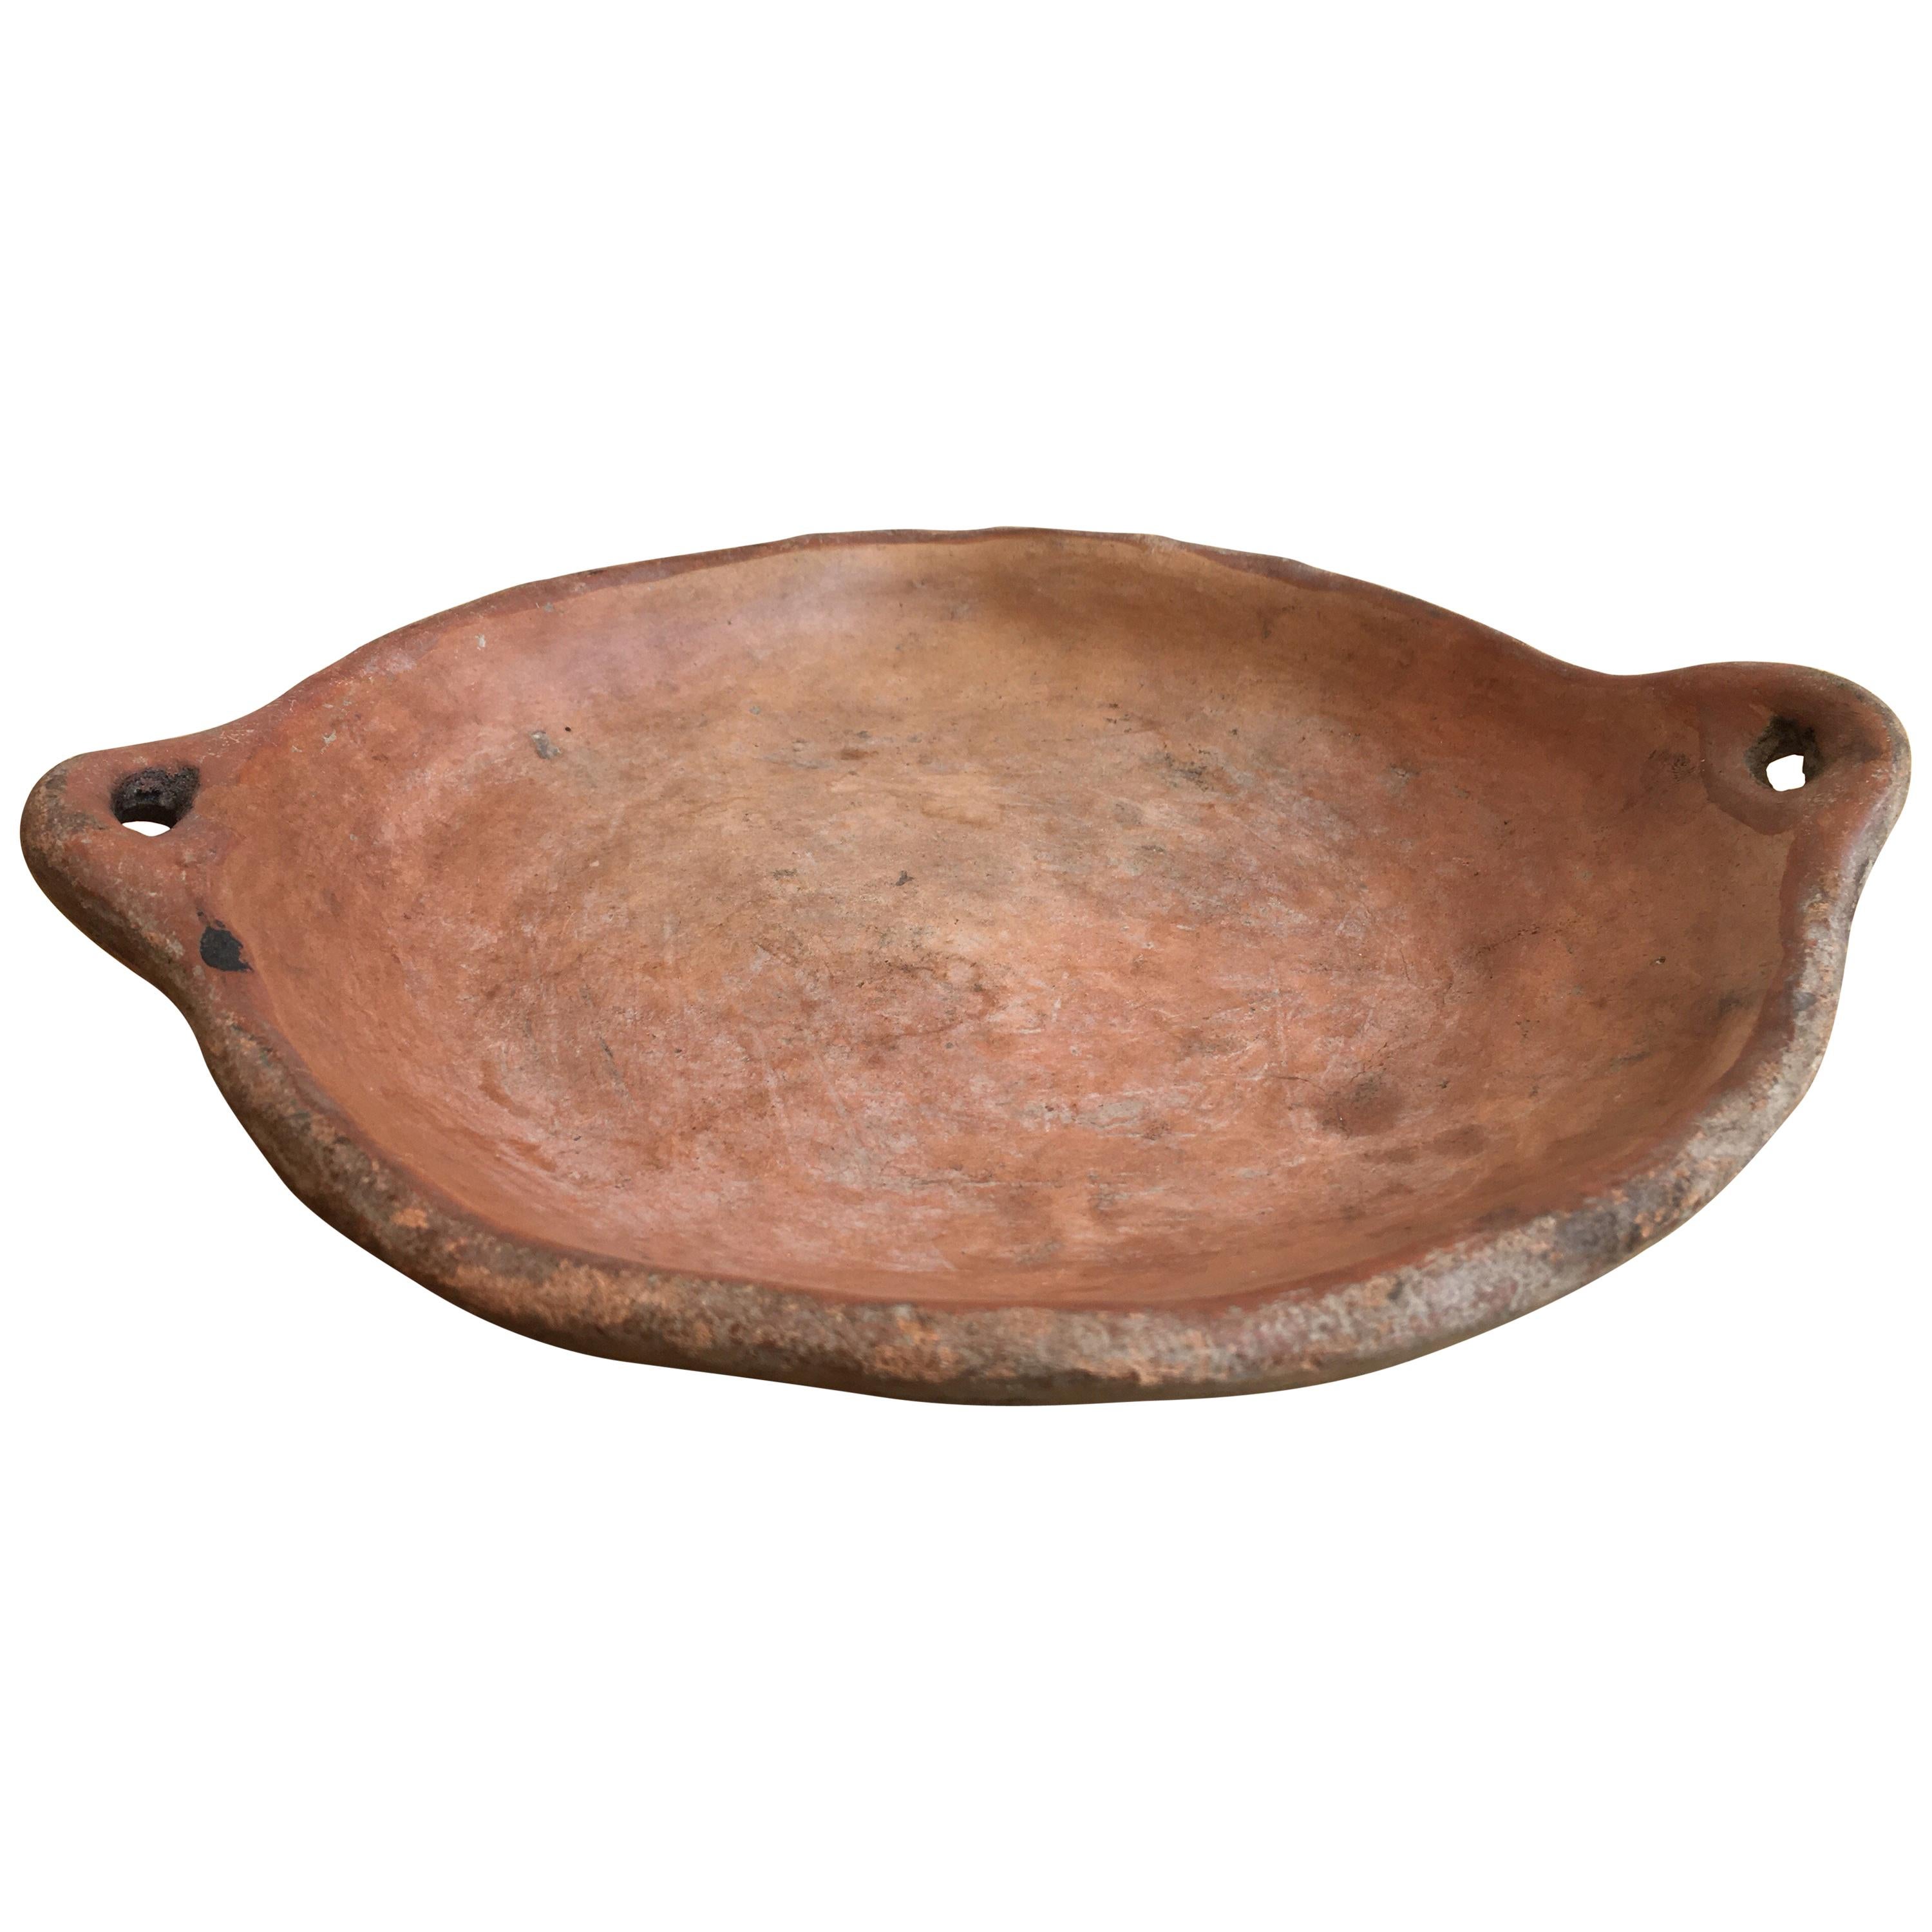 Terracotta Plate from Guerrero, Mexico